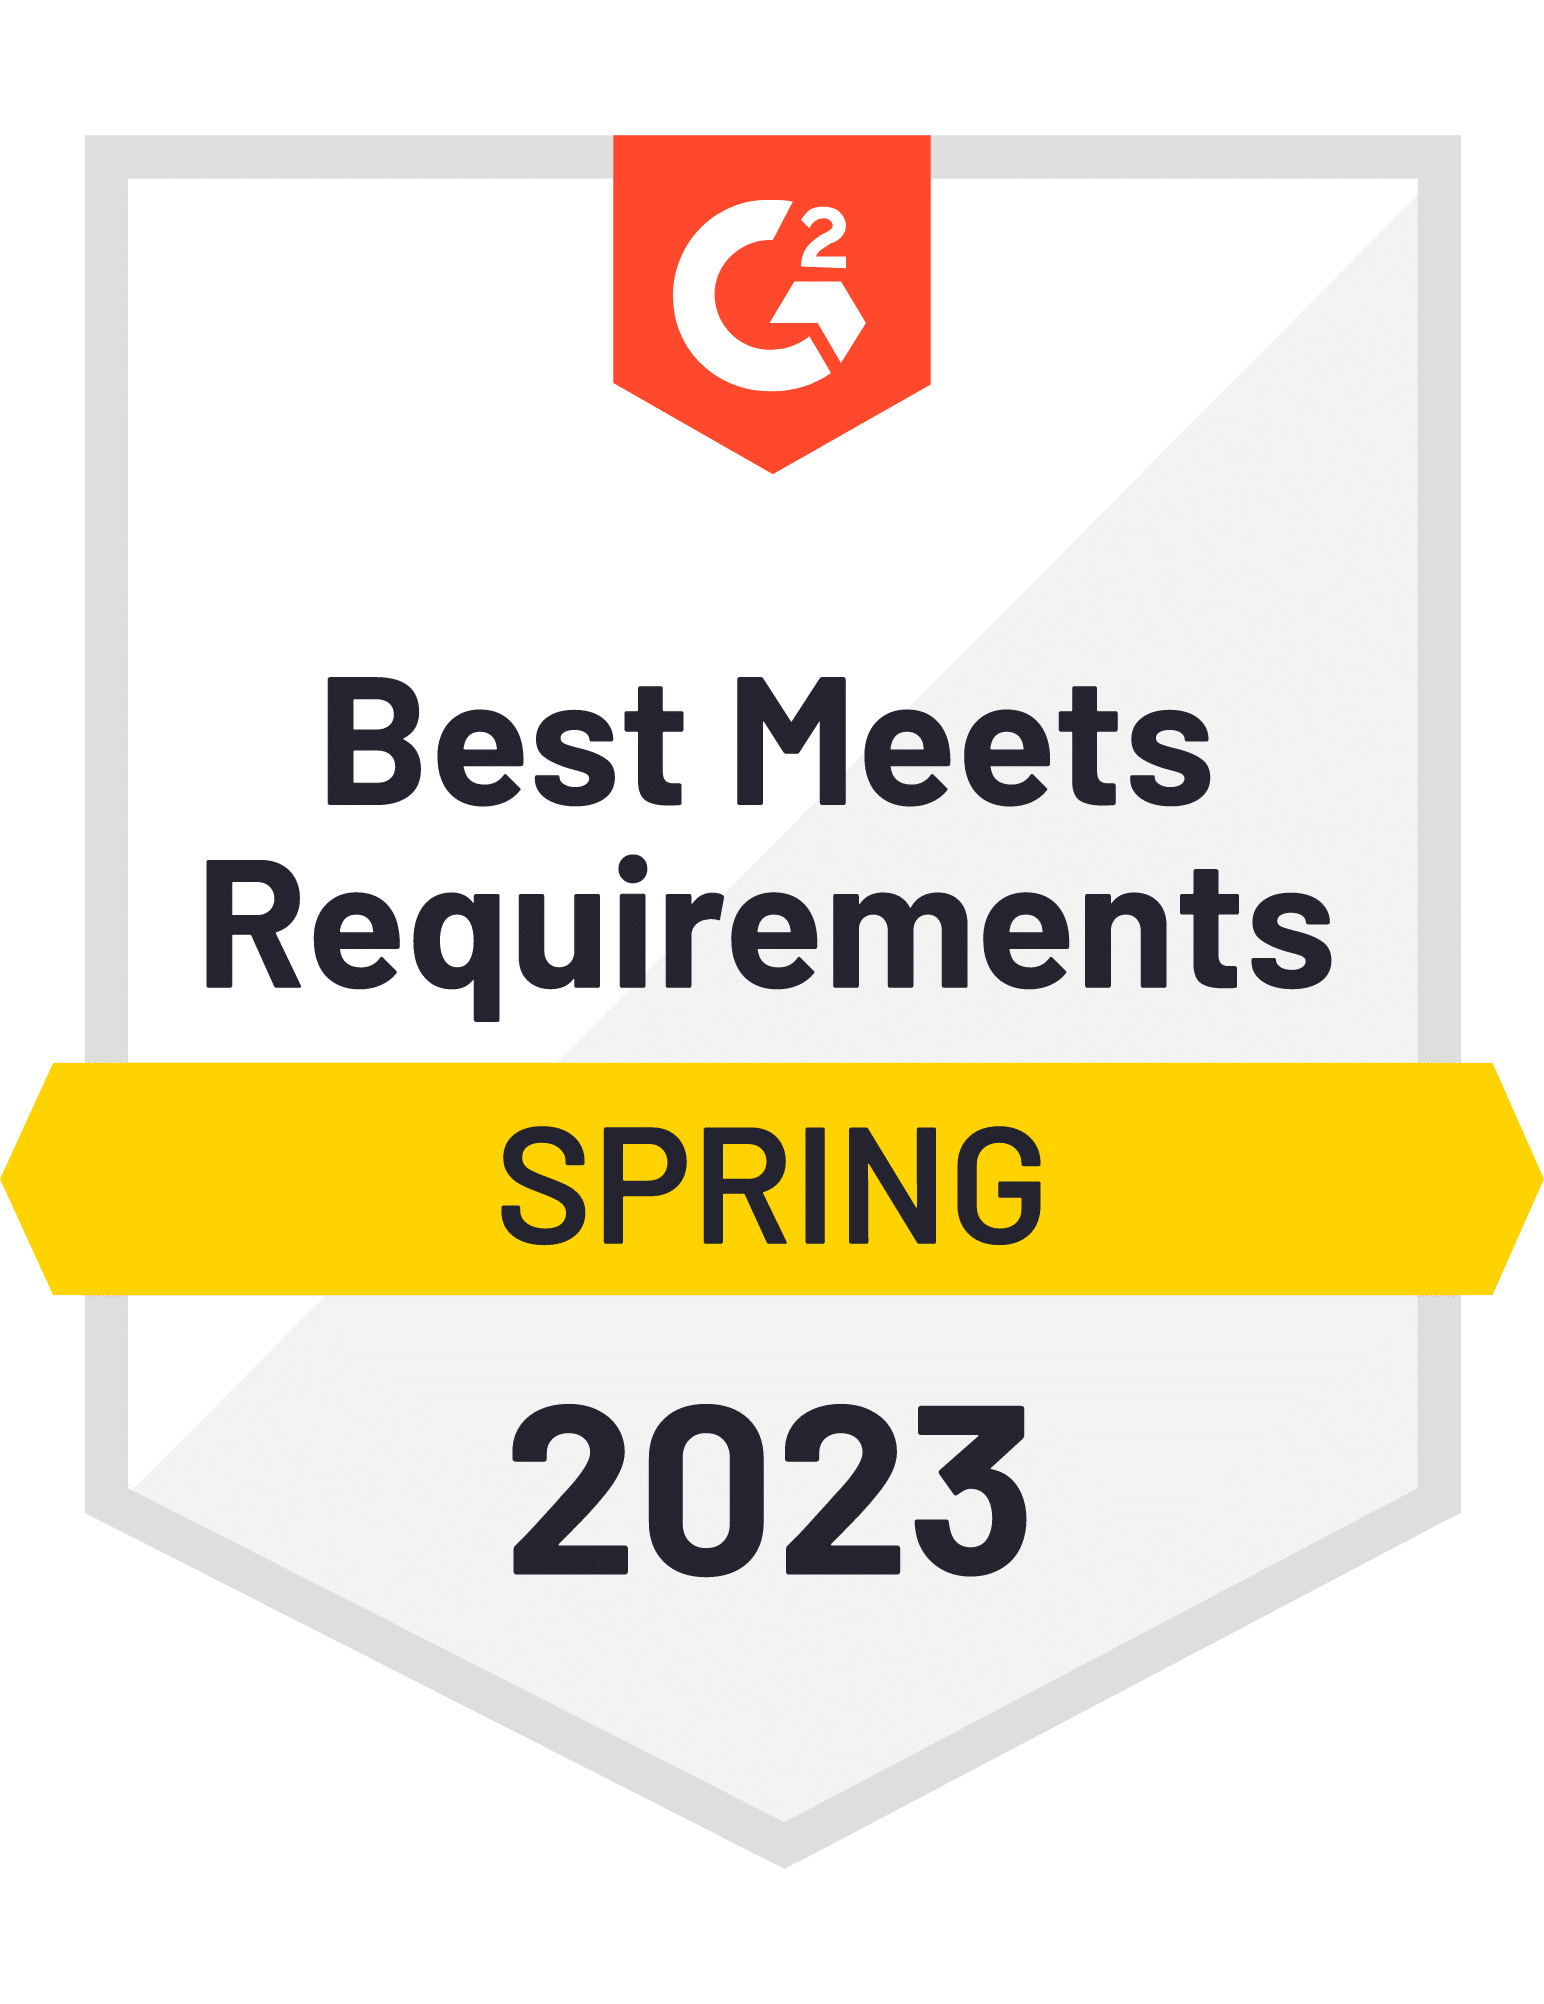 Best Meets Requirements Spring 2023 G2 Award